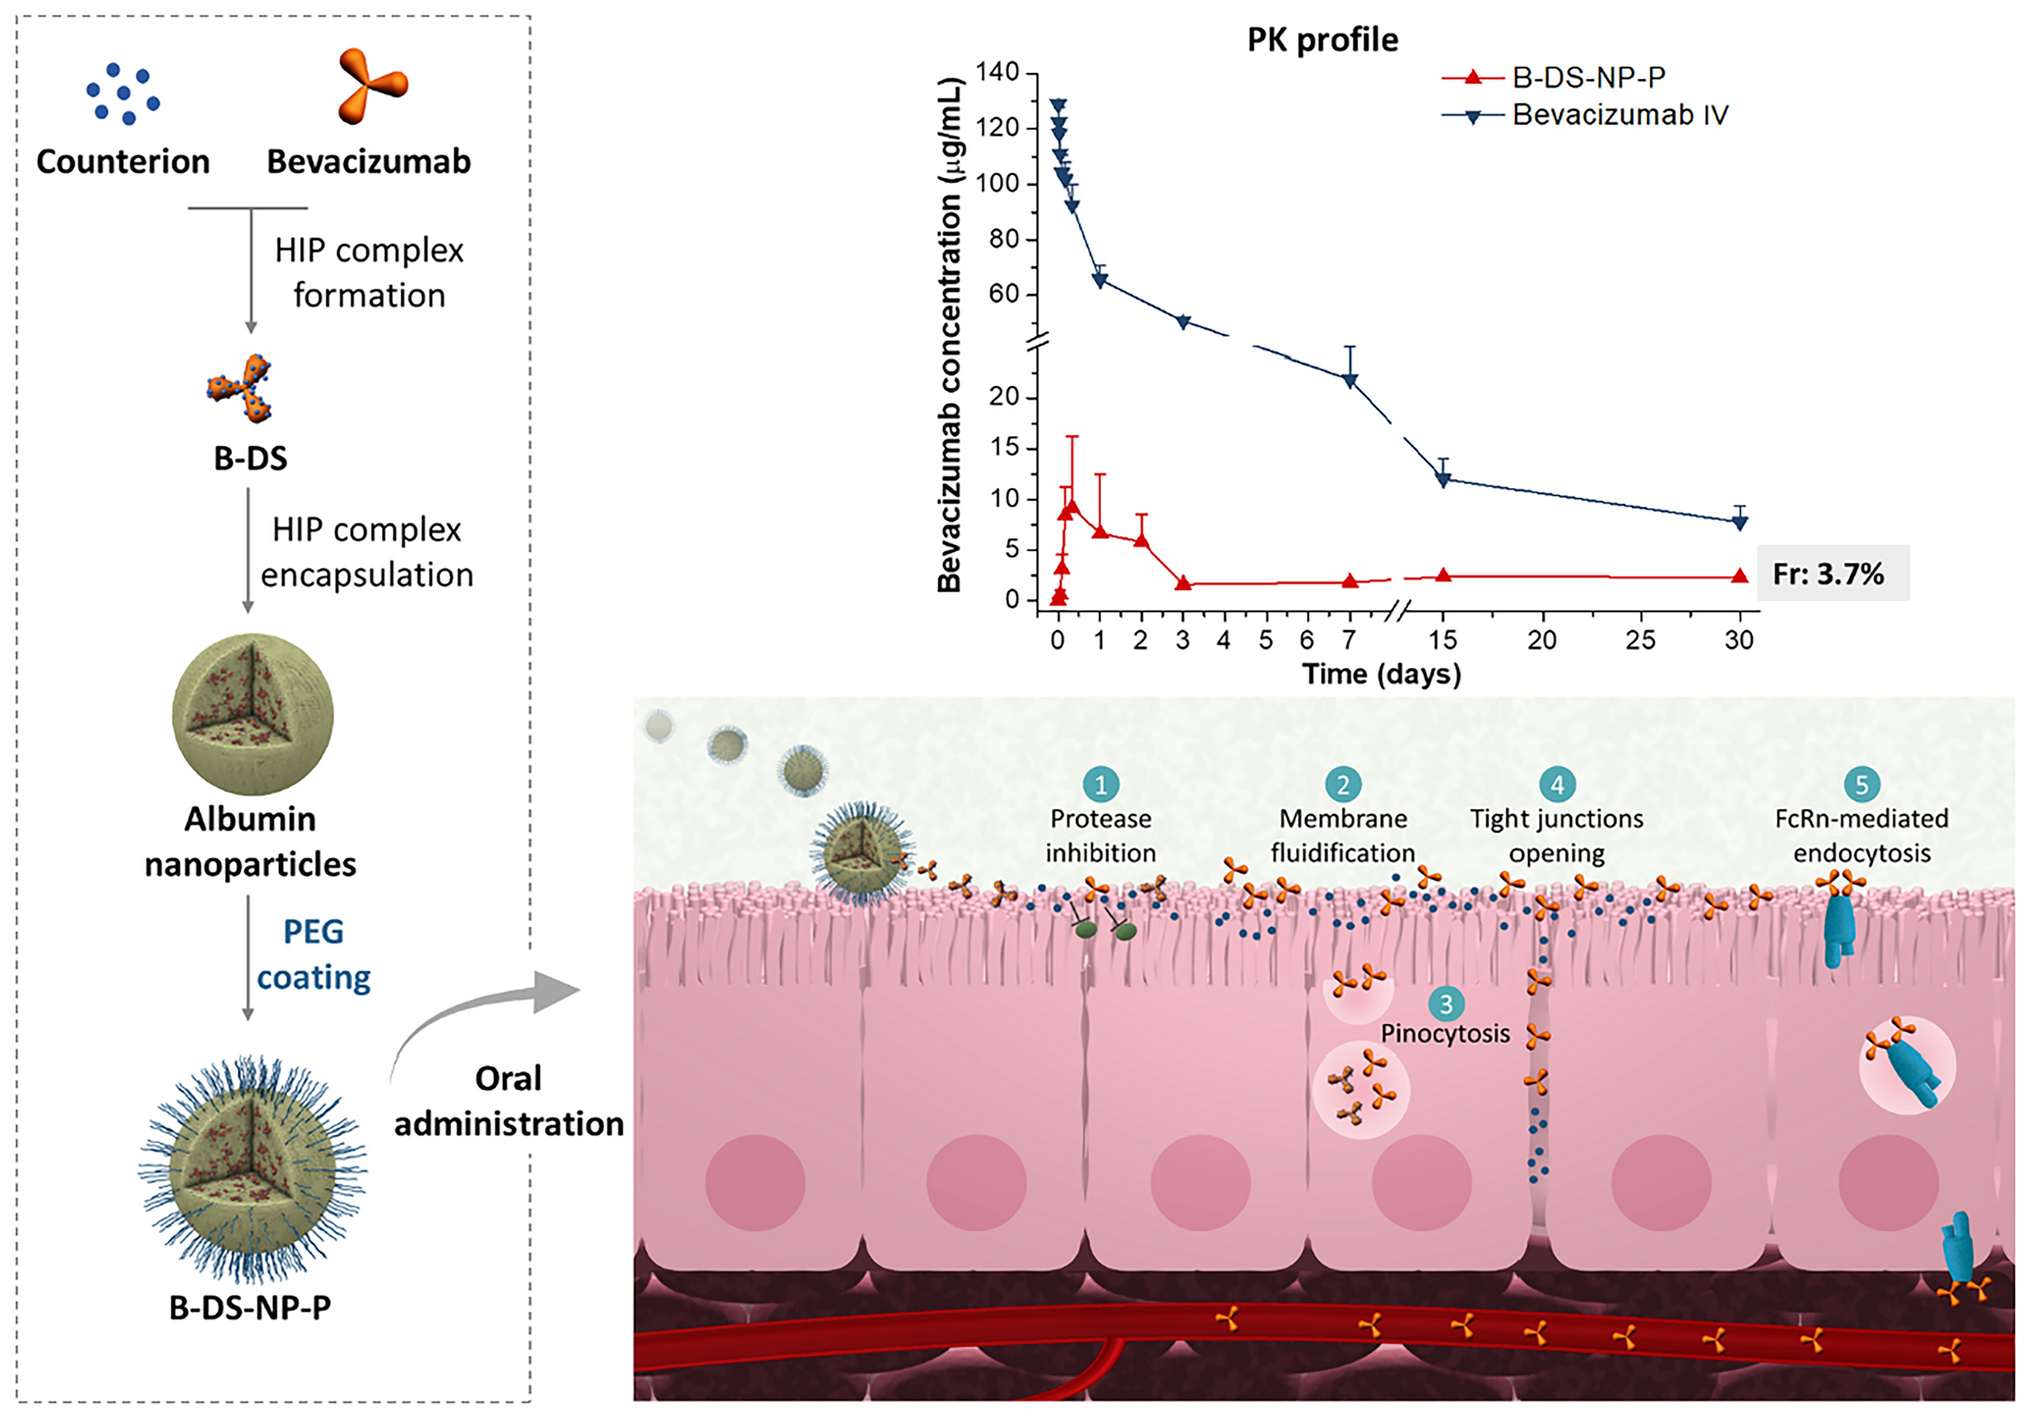 Mucus-penetrating and permeation enhancer albumin-based nanoparticles for oral delivery of macromolecules: Application to bevacizumab